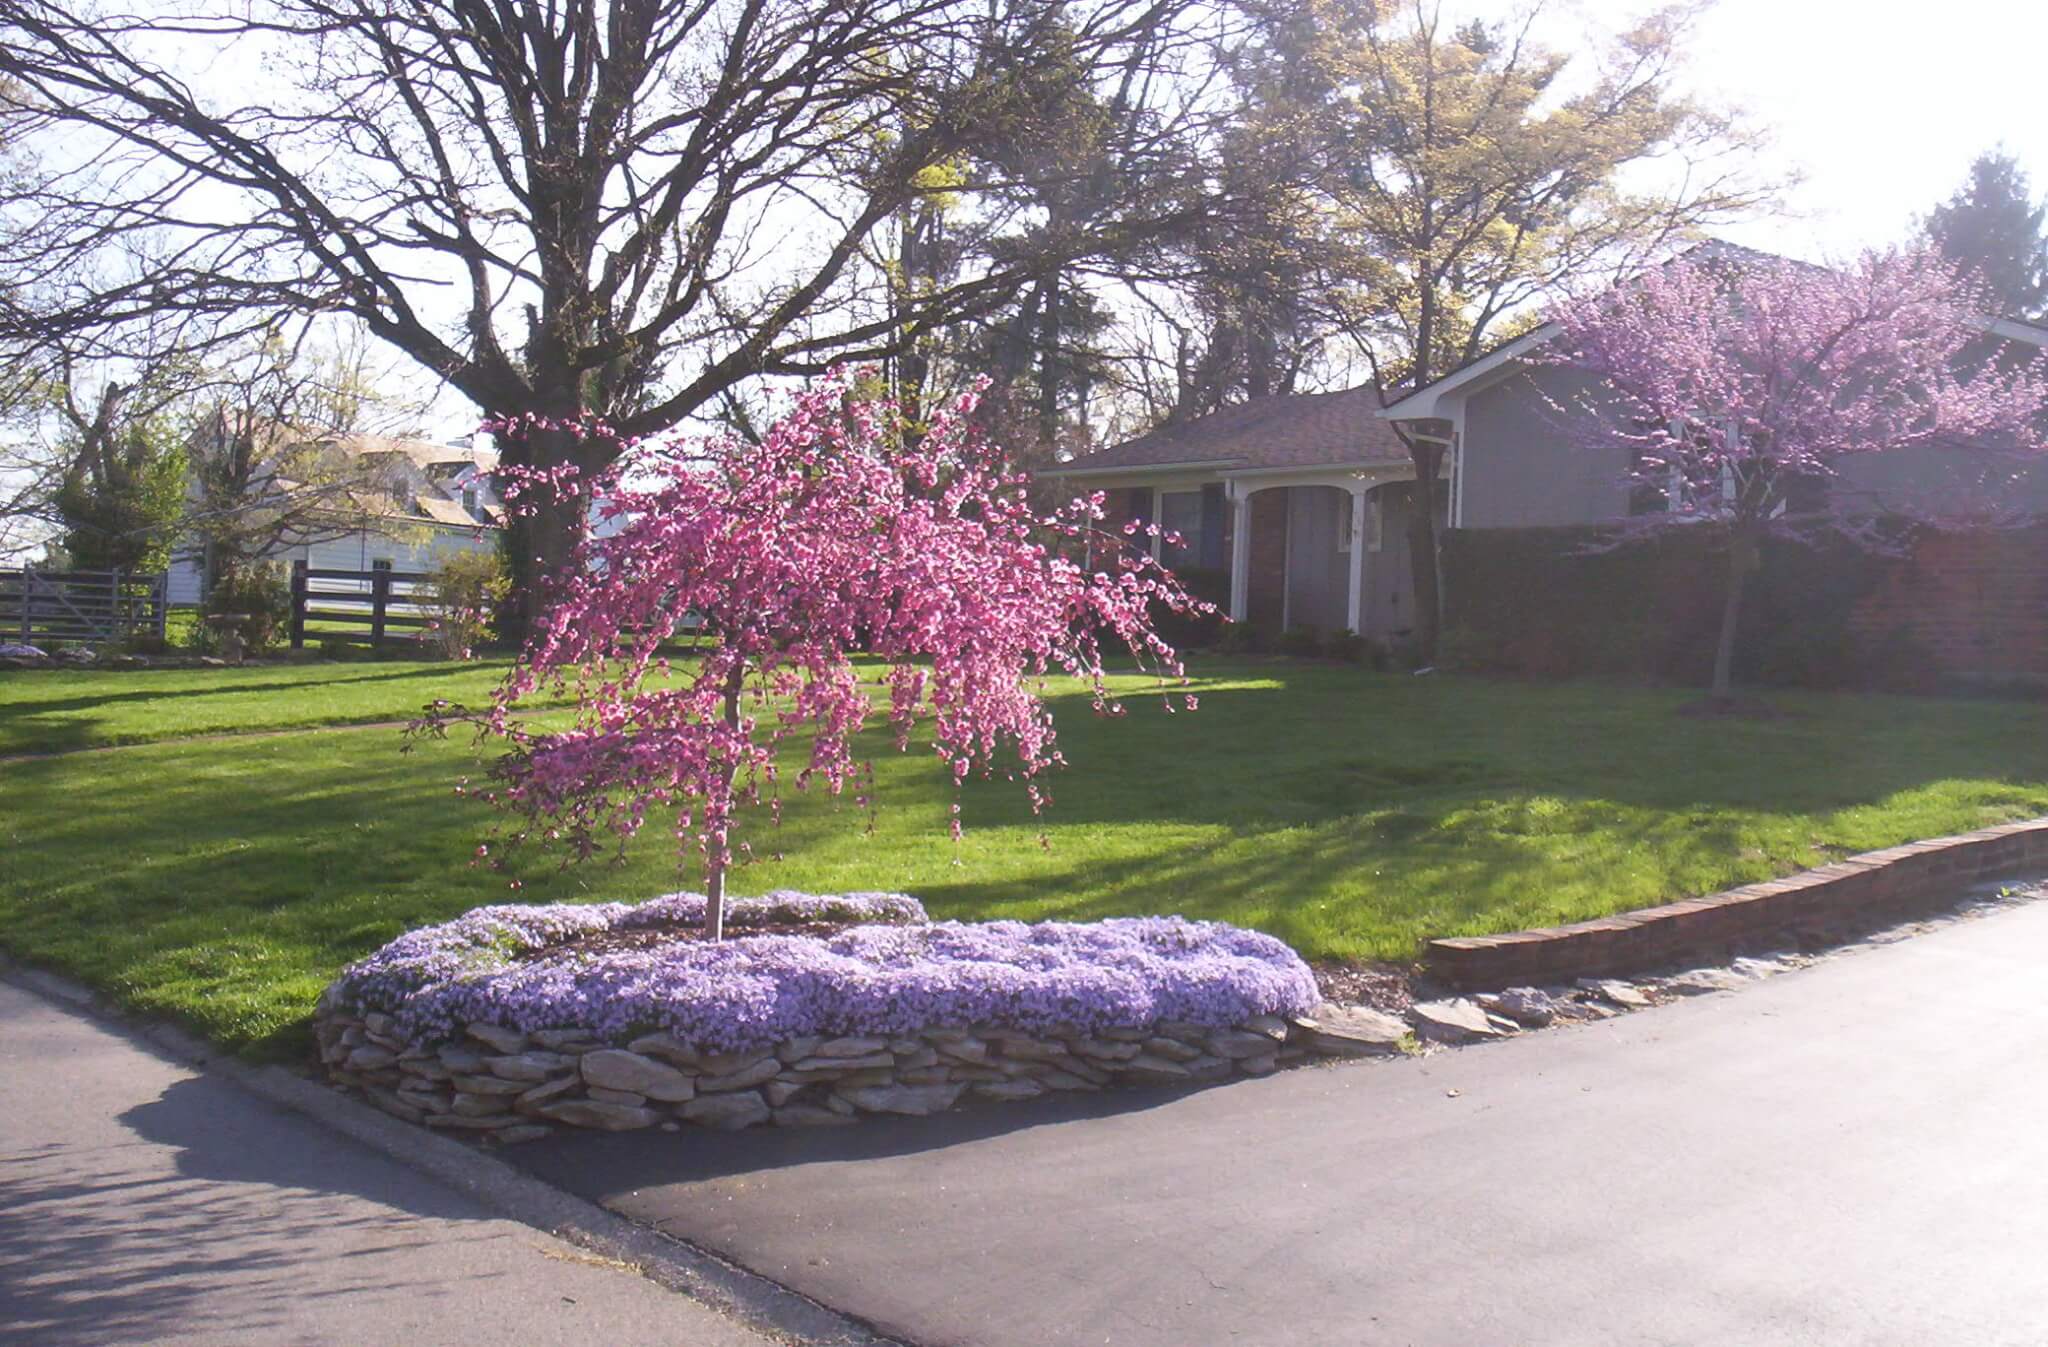 Landscaping with spring-flowering trees and perennials. (Much better planned than what you usually see, I hate to say.)